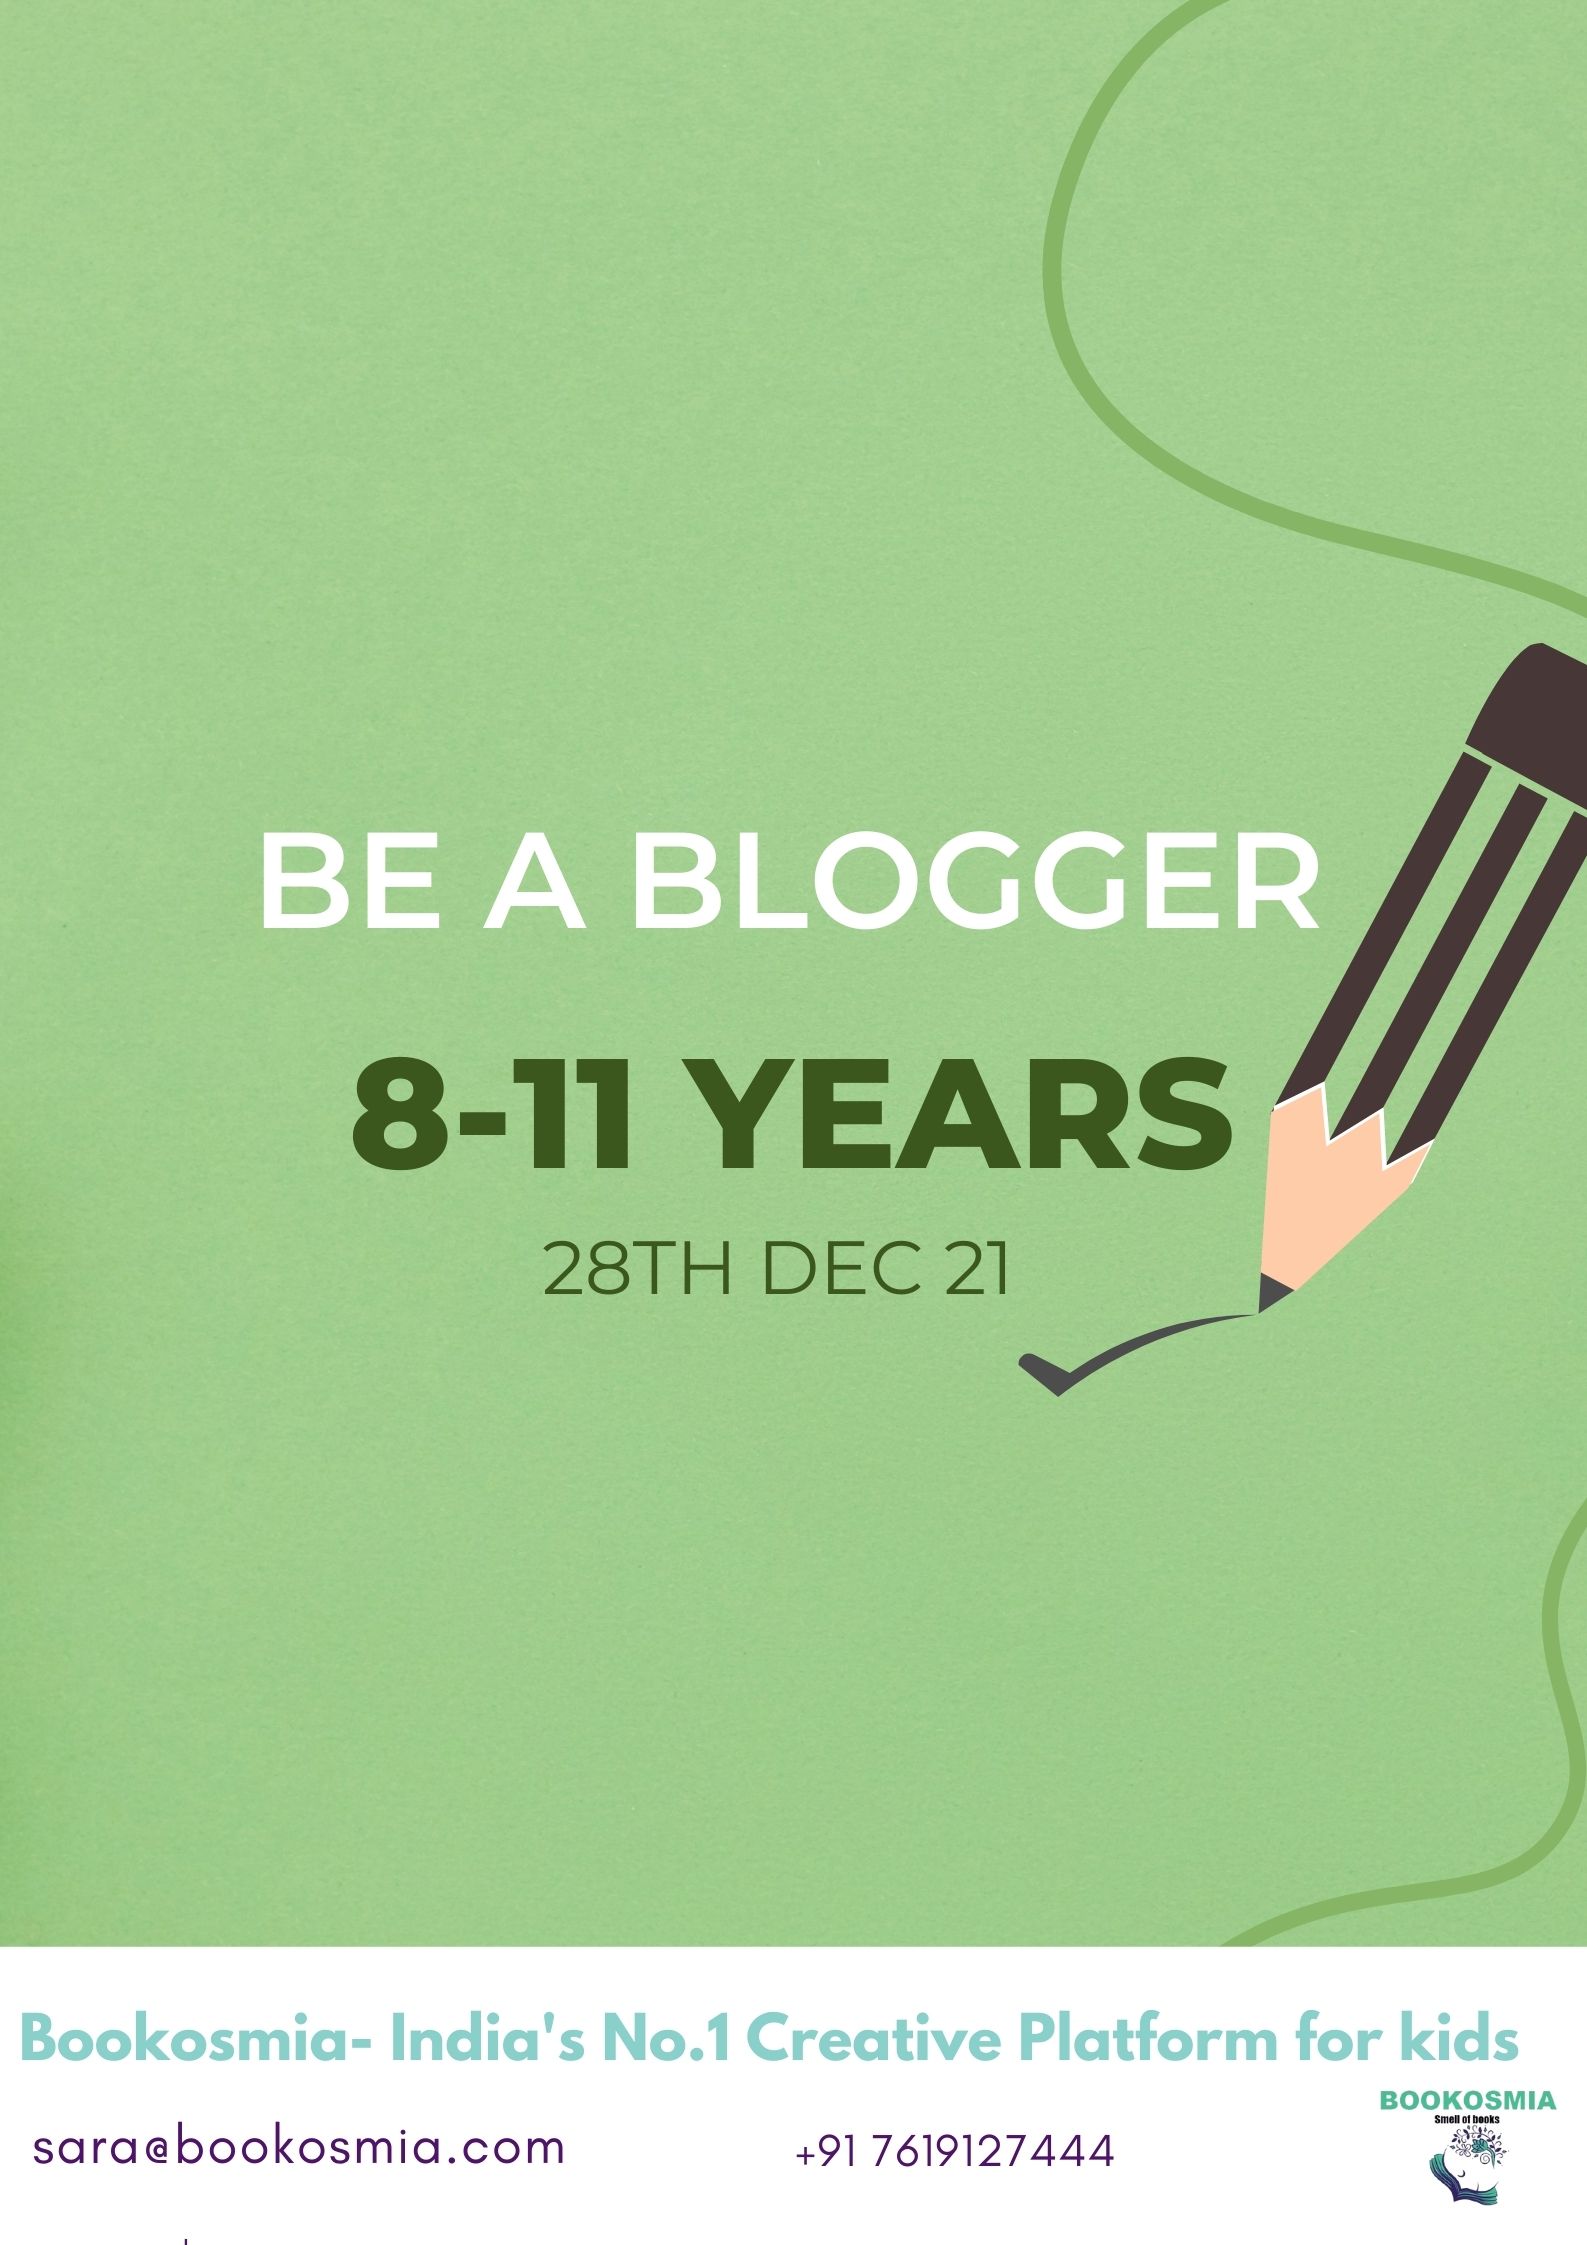 Be A Blogger- 8-11 years